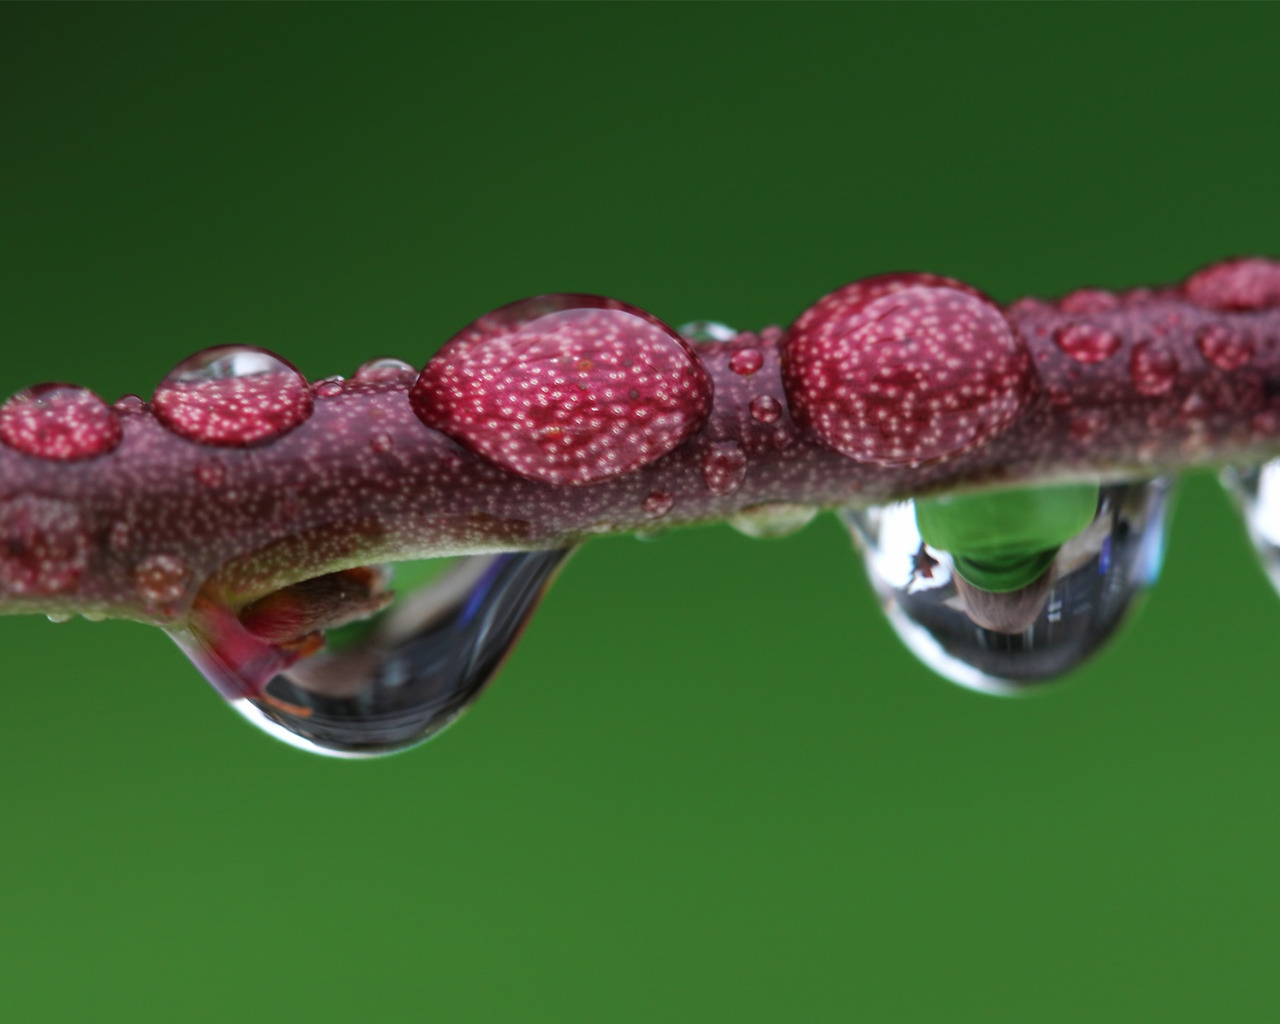 Droplet magnified branch for 1280 x 1024 resolution